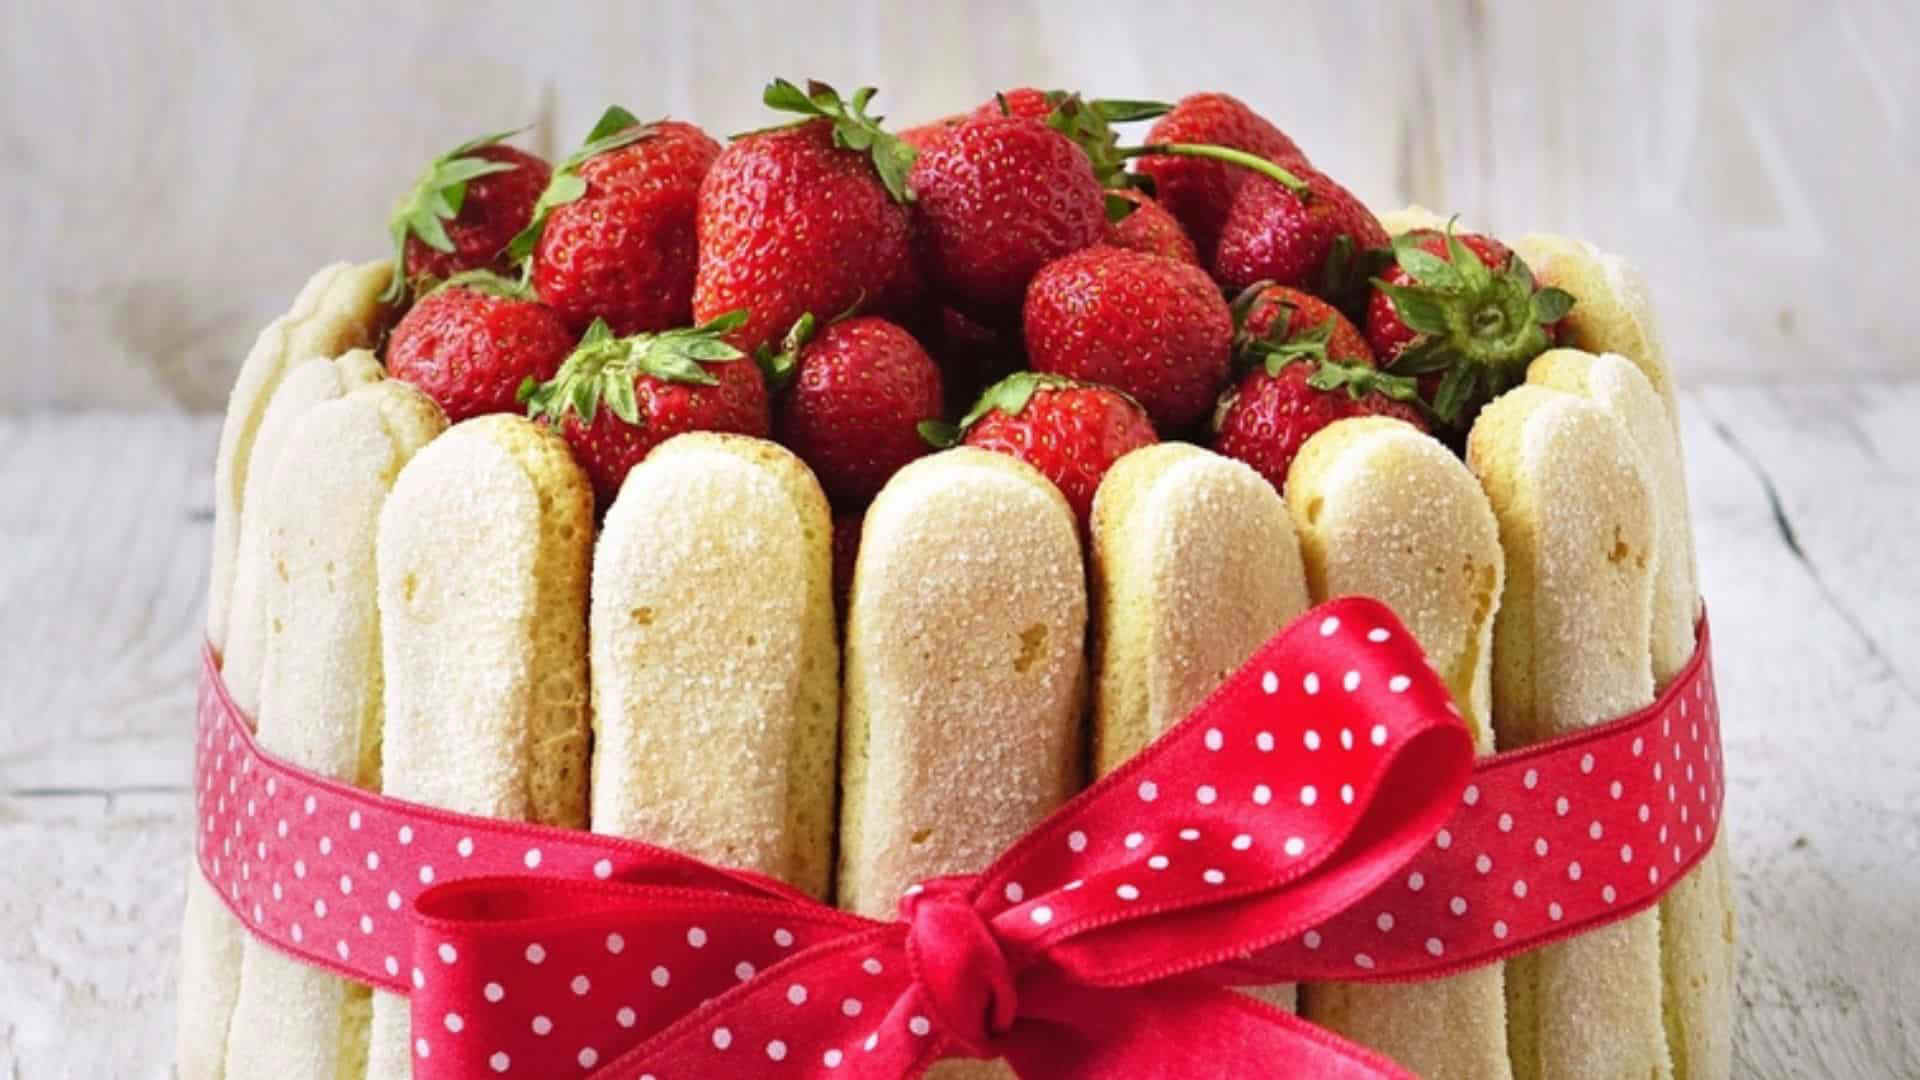 Easy and Elegant: You Must Try This No-Bake Strawberry Cake